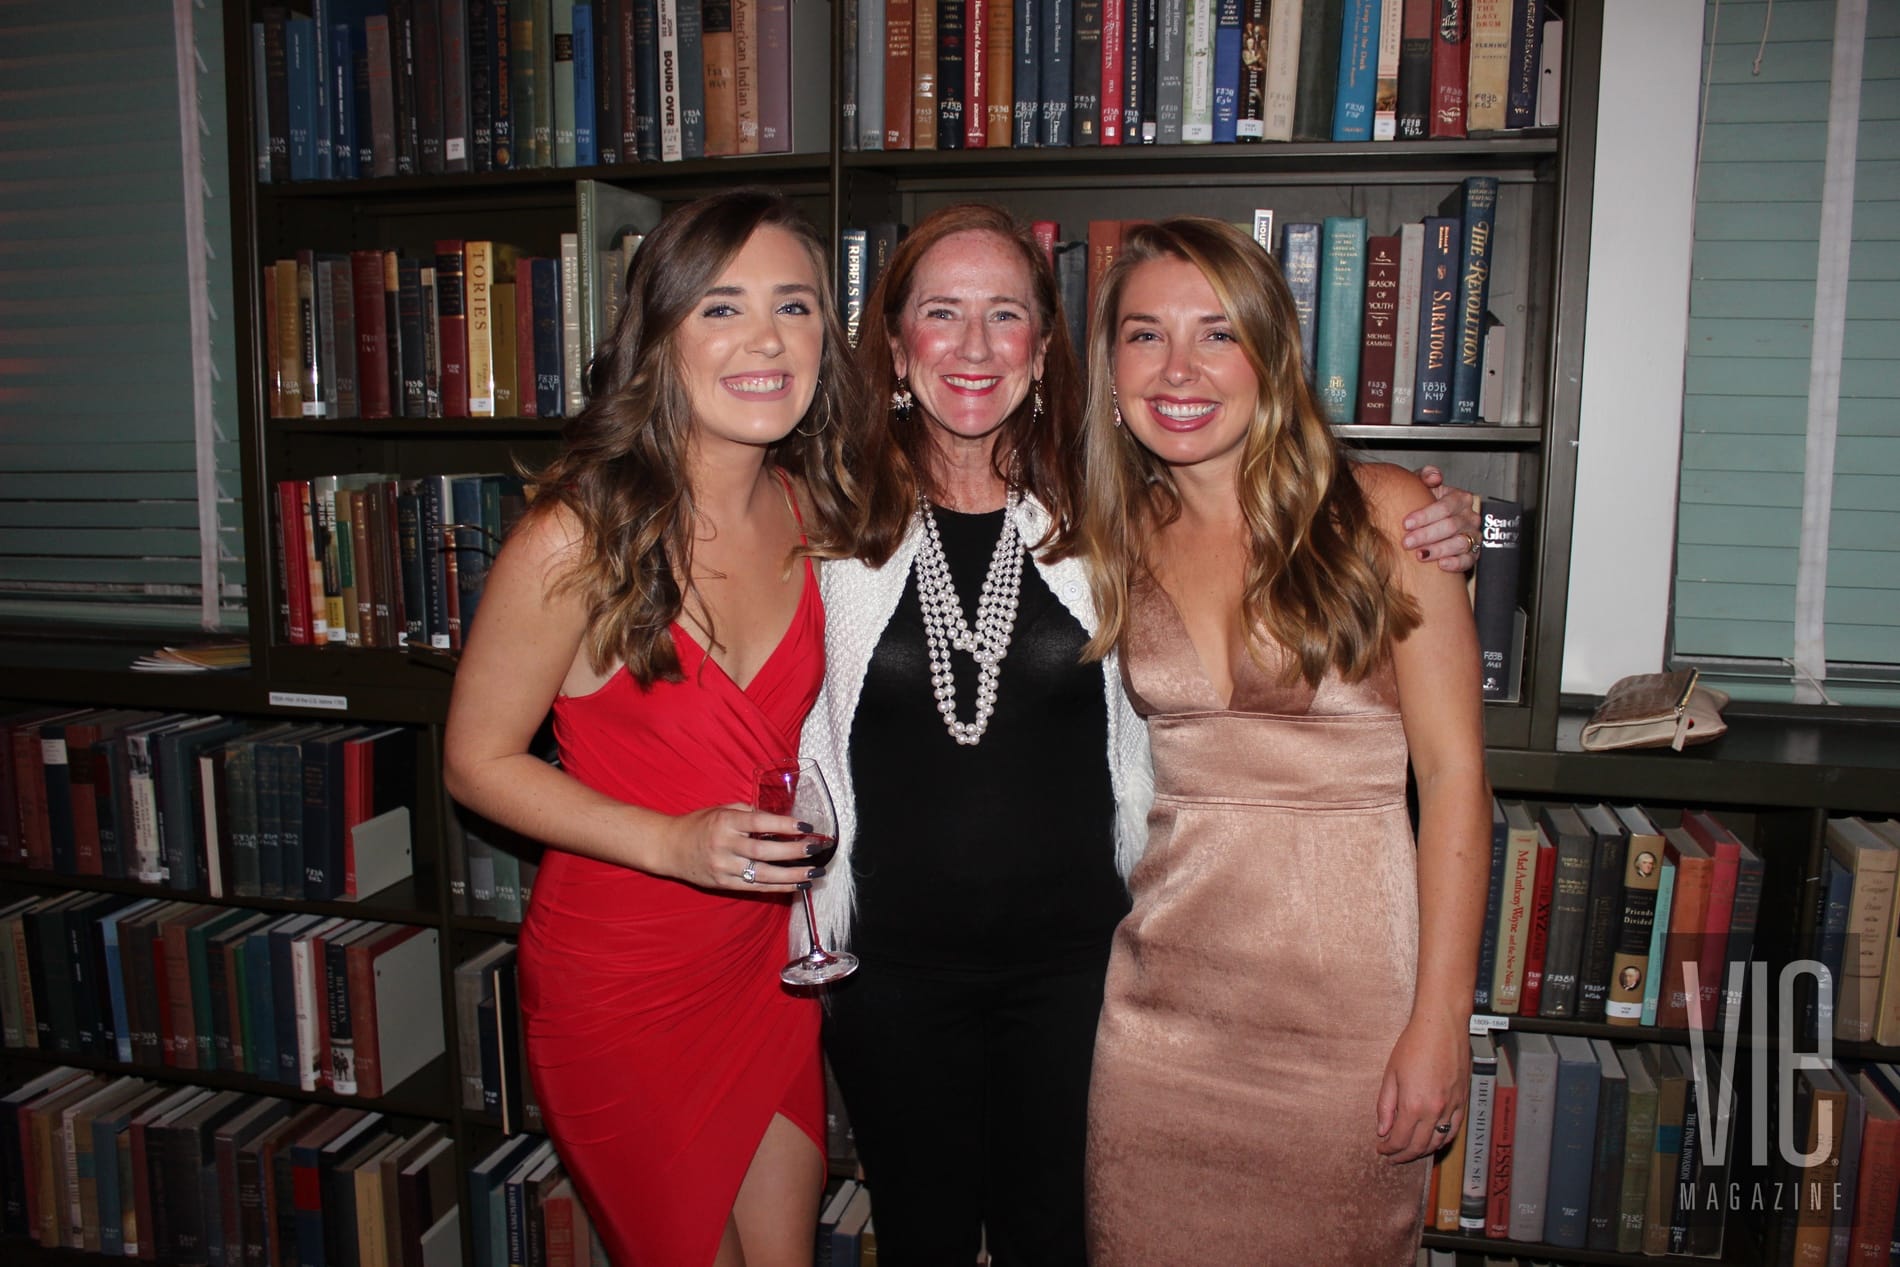 Abigail Ryan, Marieanne Duffey, and Meghan Ryan at the Charleston Library Society during C2C festival Opening Night Gala 2018 sponsored by VIE